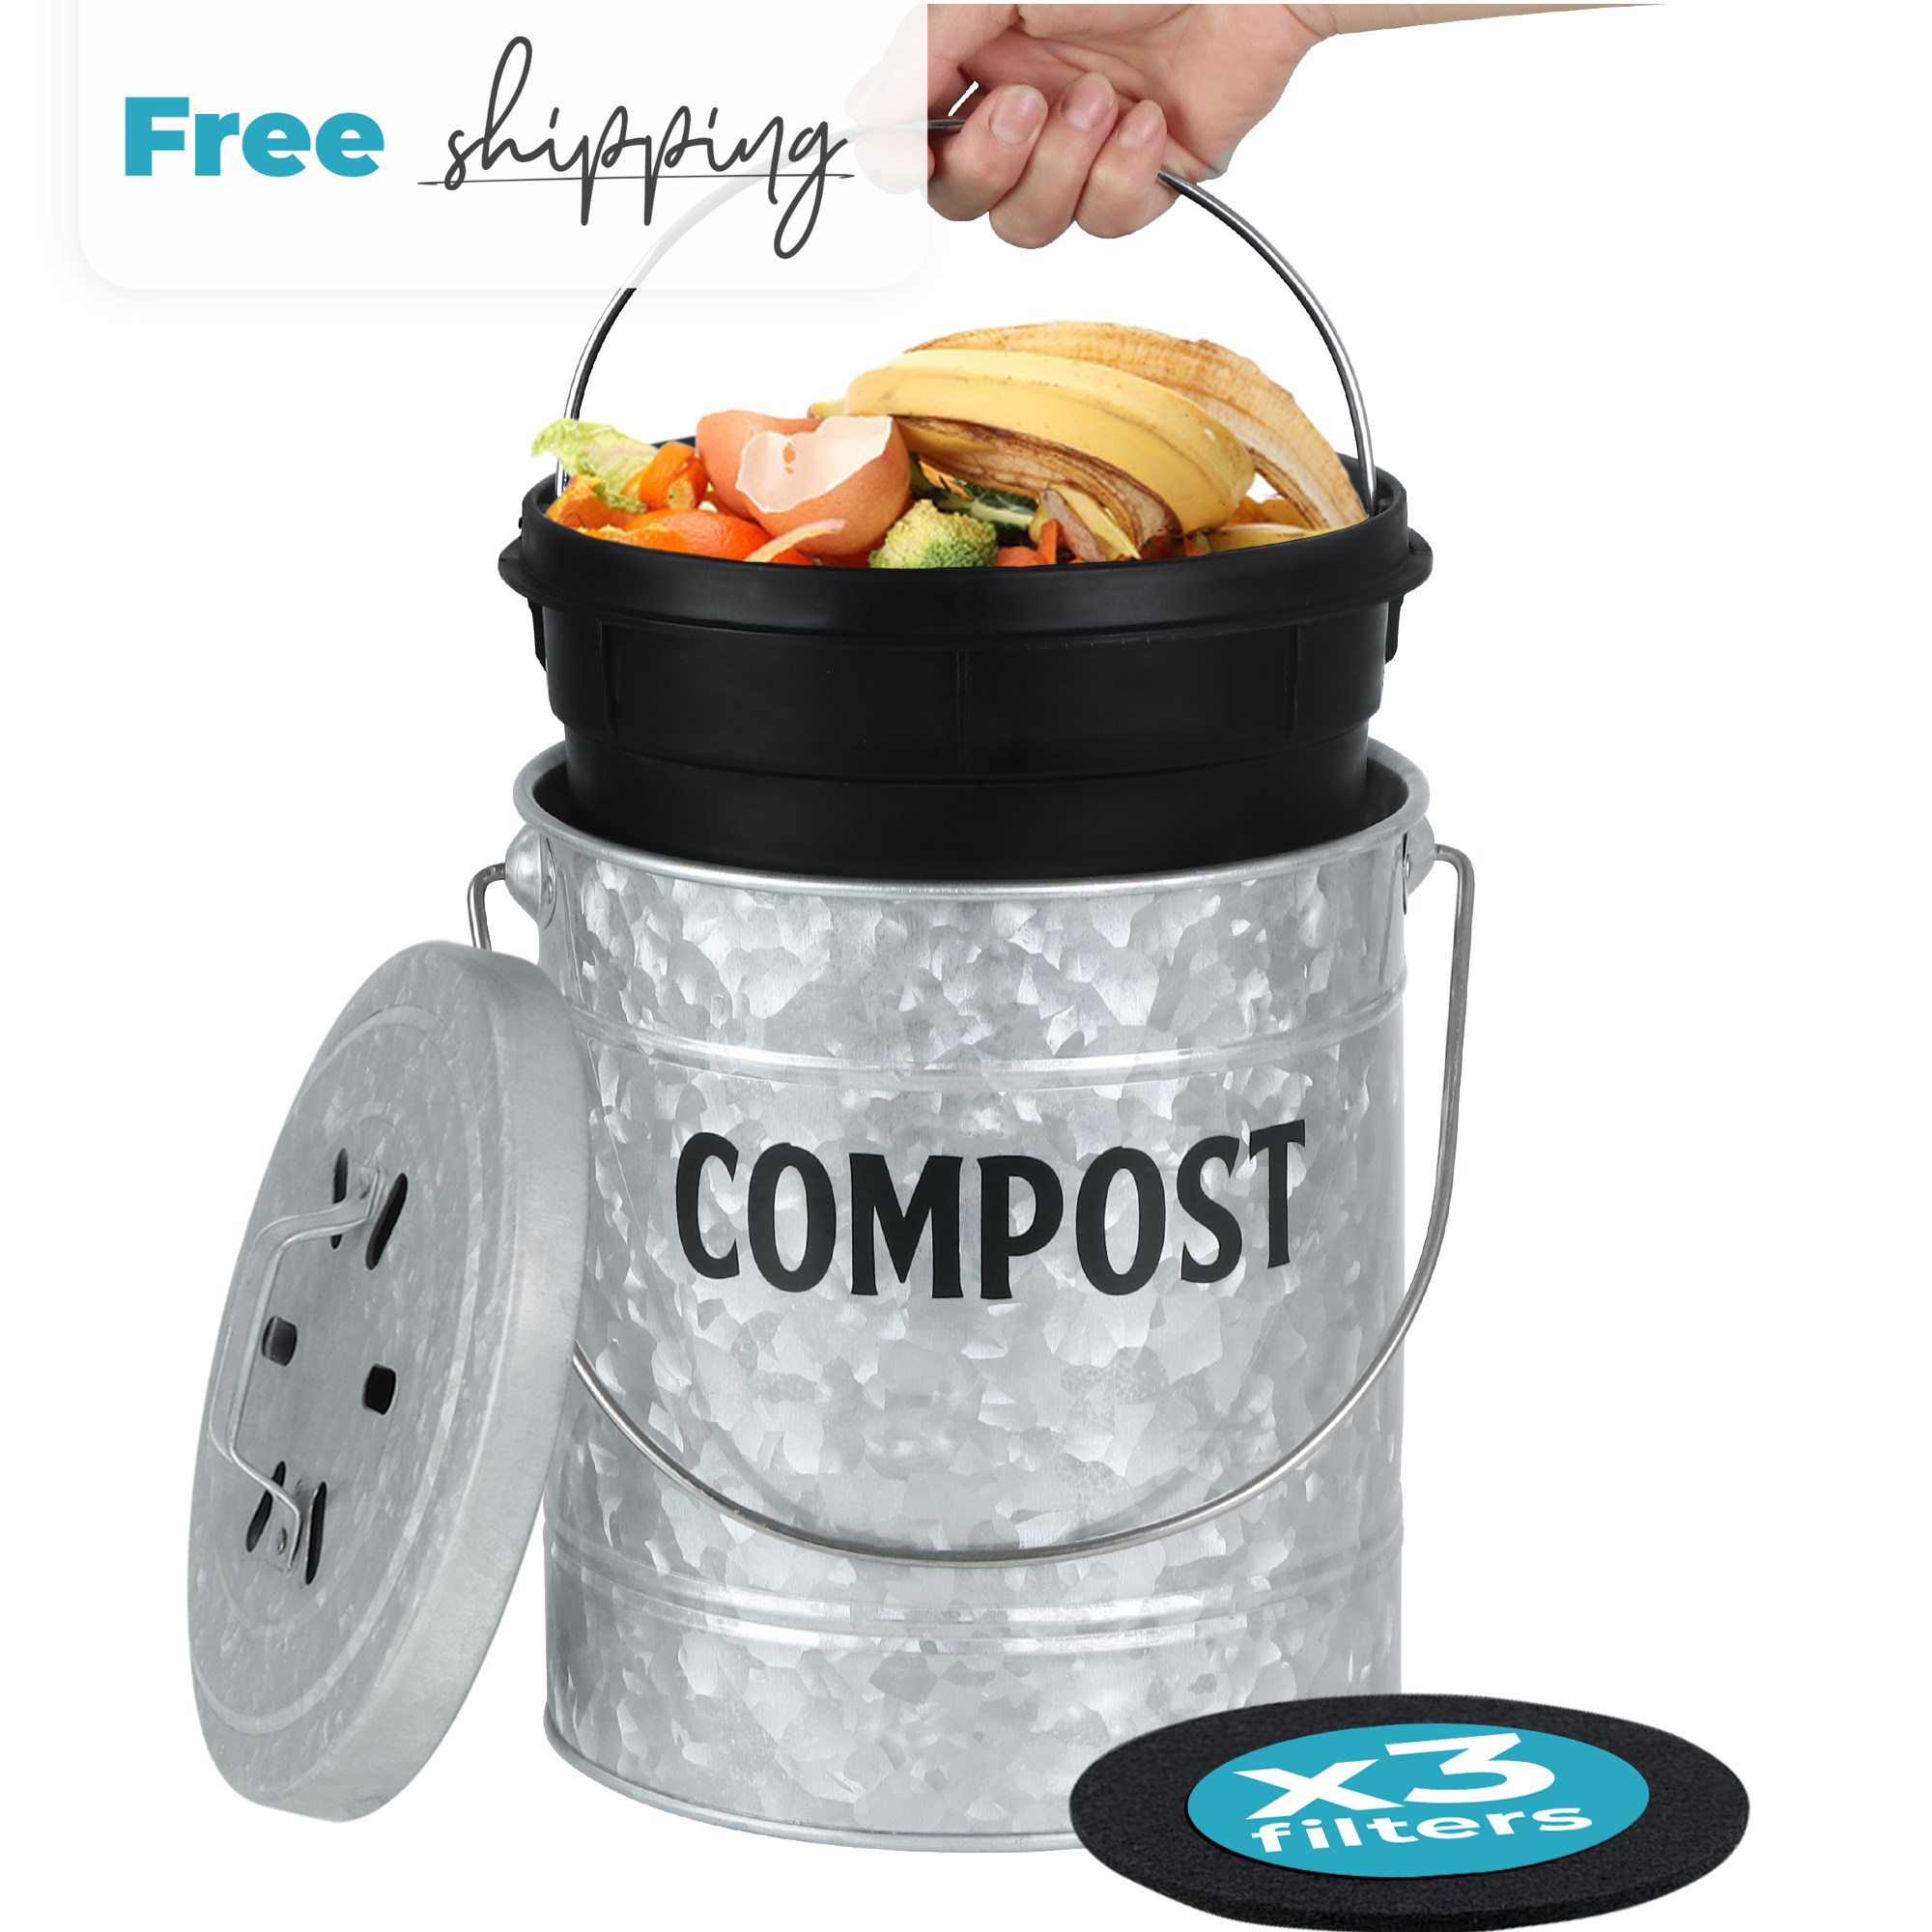 Natural Home 1.3 Gal. Stainless Steel Compost Bin - Silver